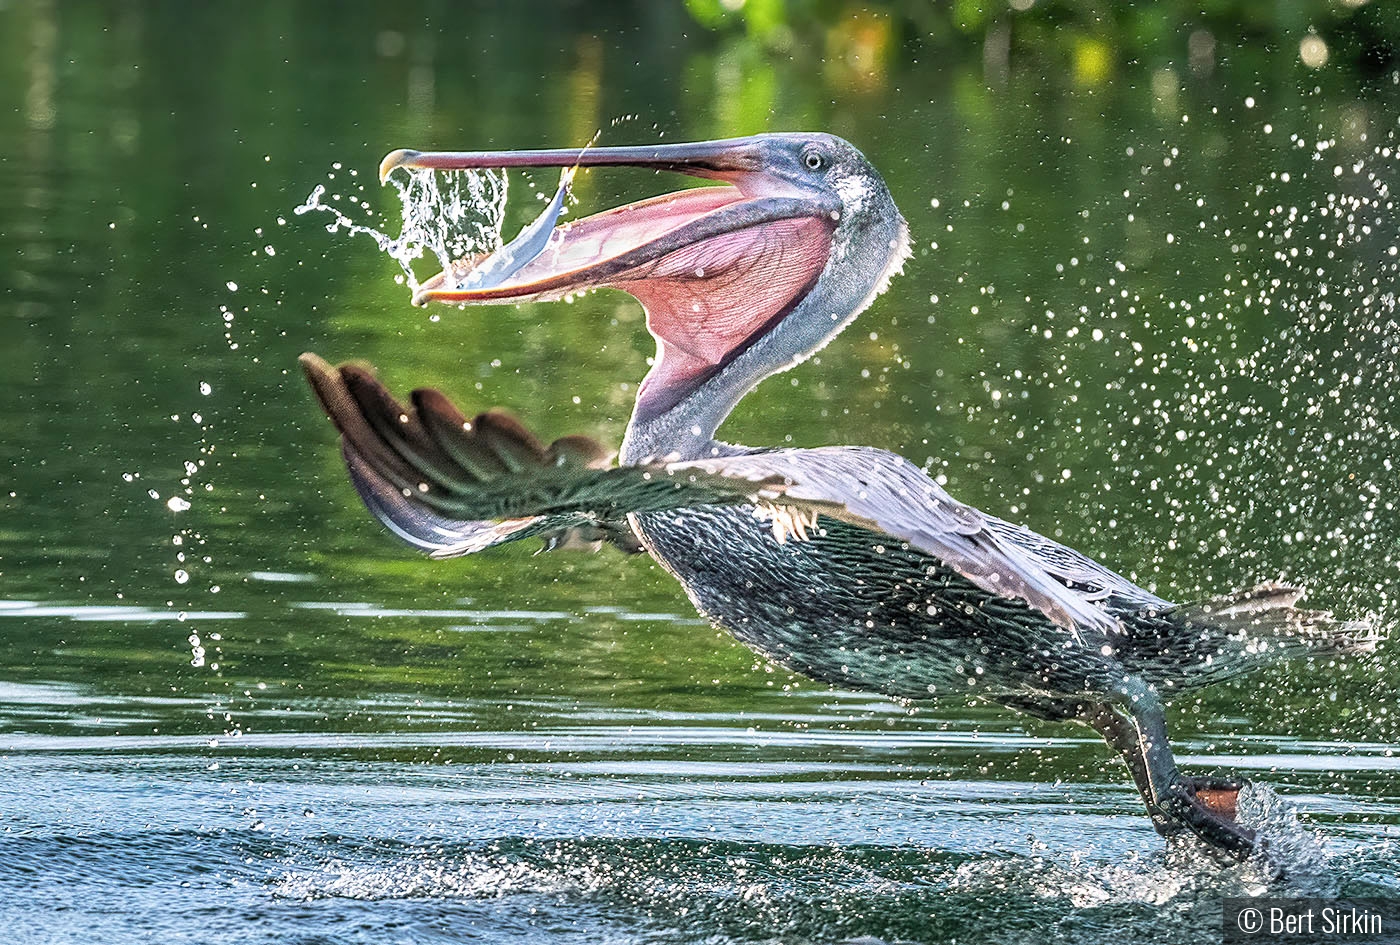 Catch of the day by Bert Sirkin